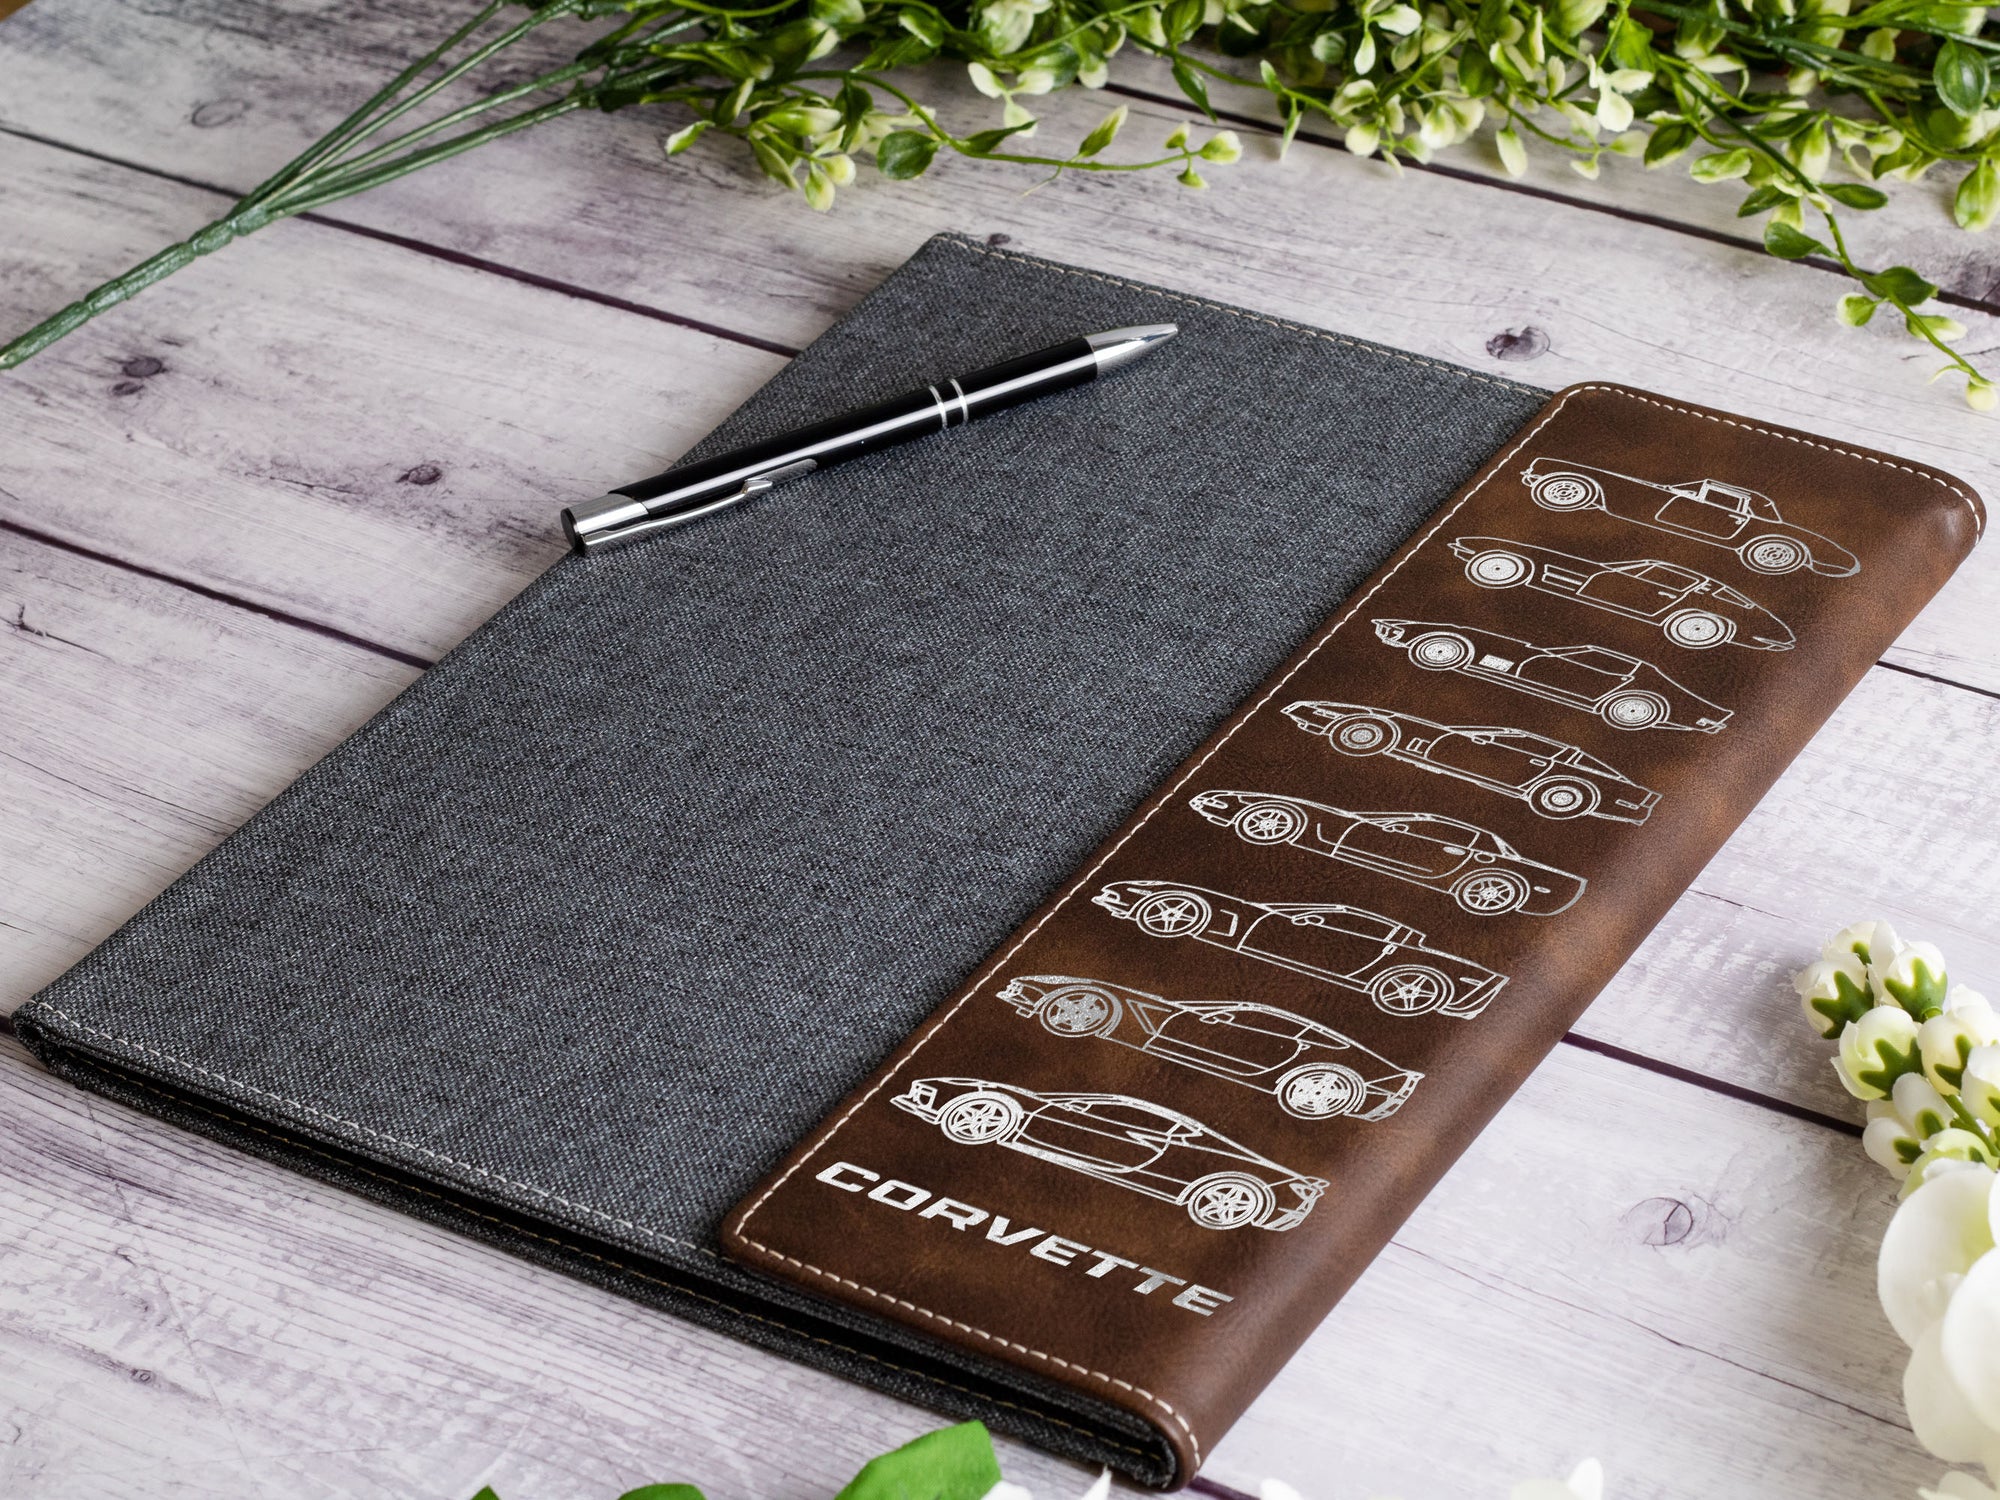 Vette Silhouette Collection Engraved Leather Portfolio